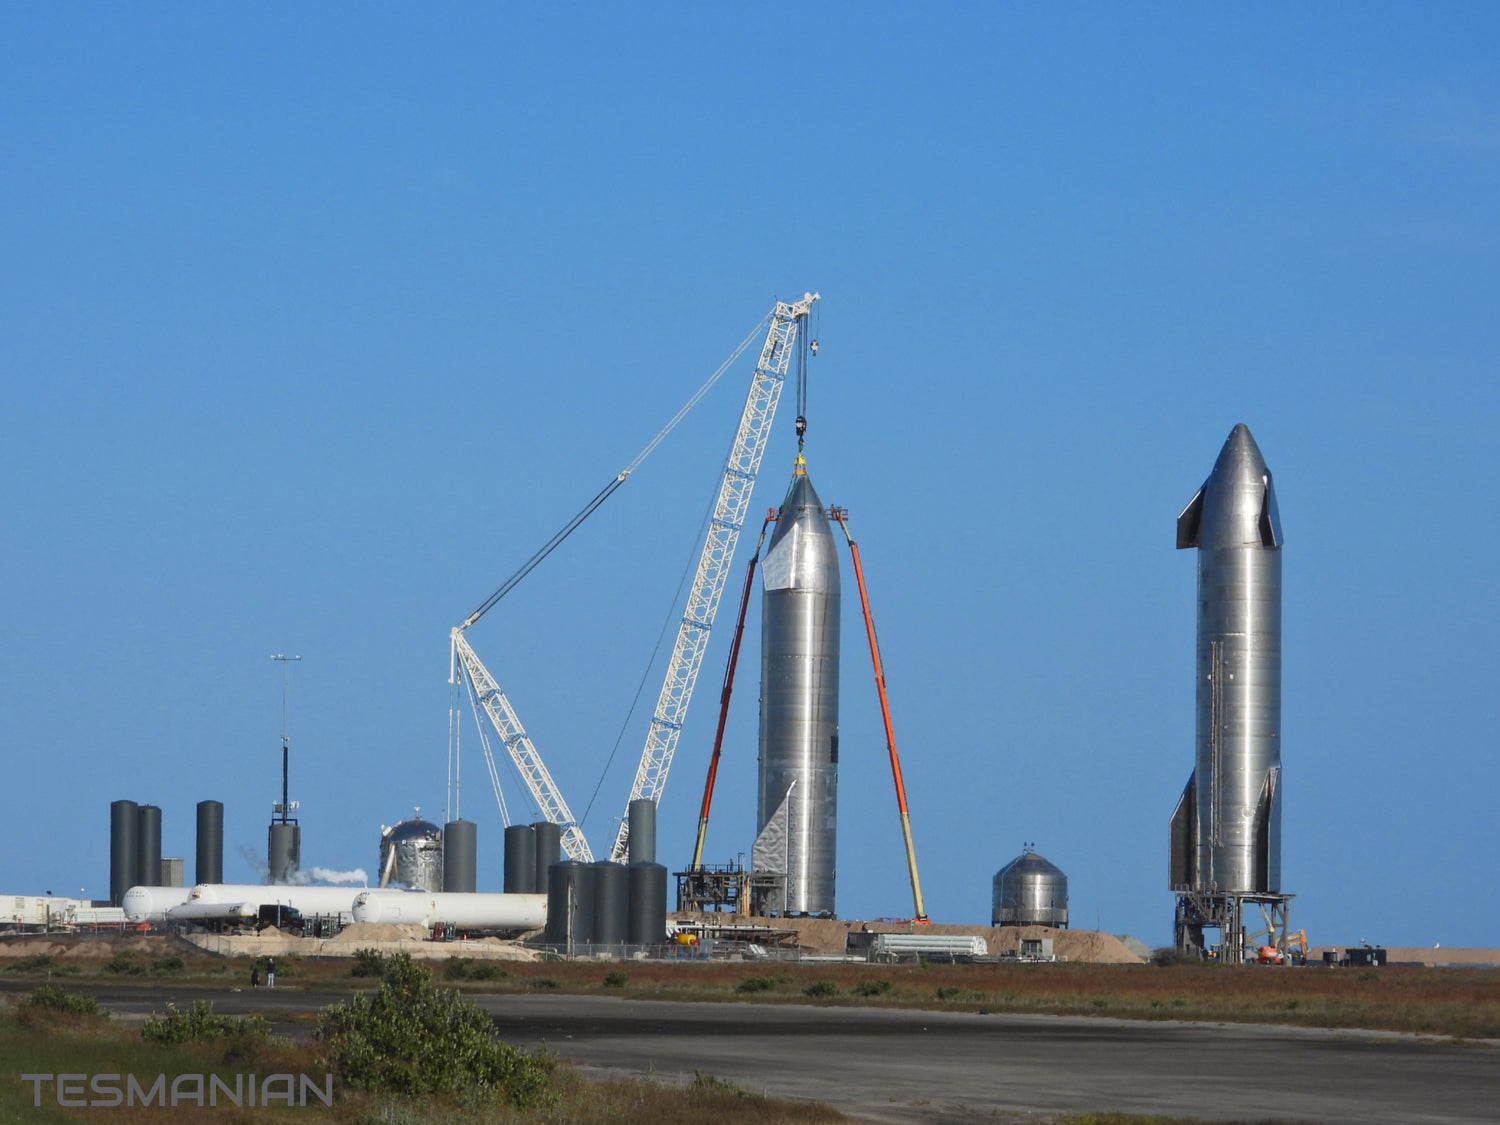 Two Starships await a test flight at the SpaceX South Texas Launch Site